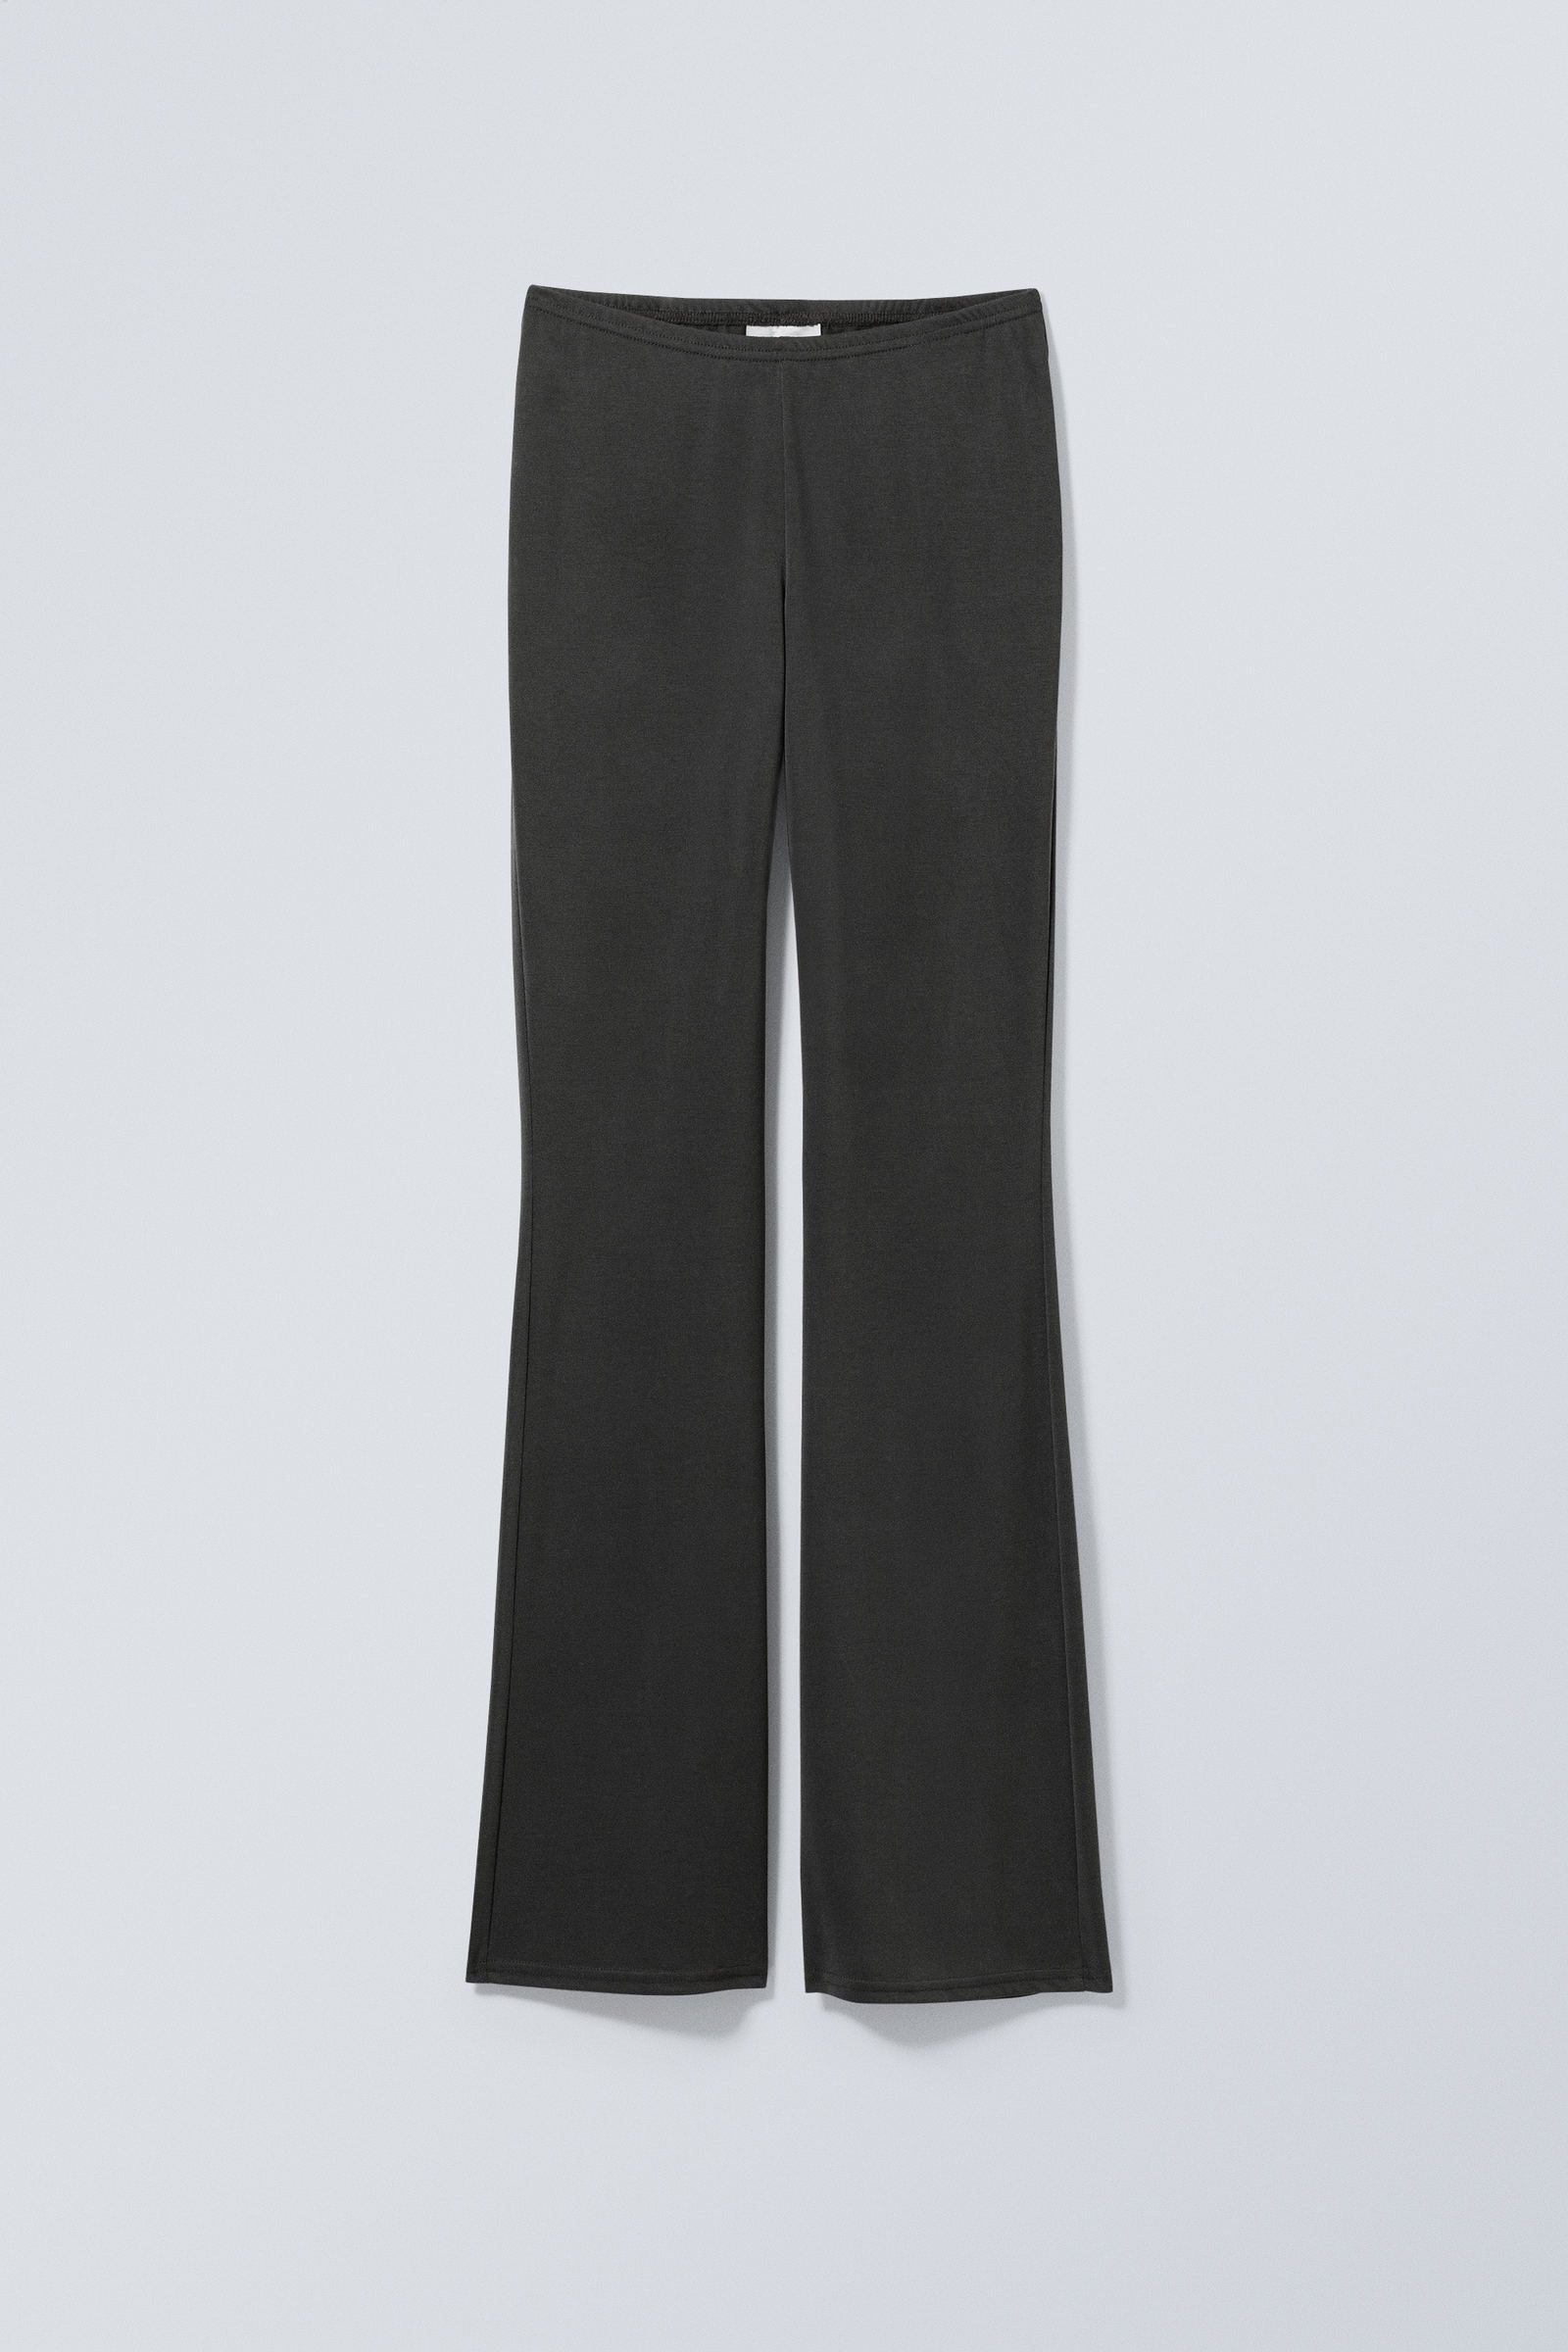 #000000 - Bea Jersey Trousers